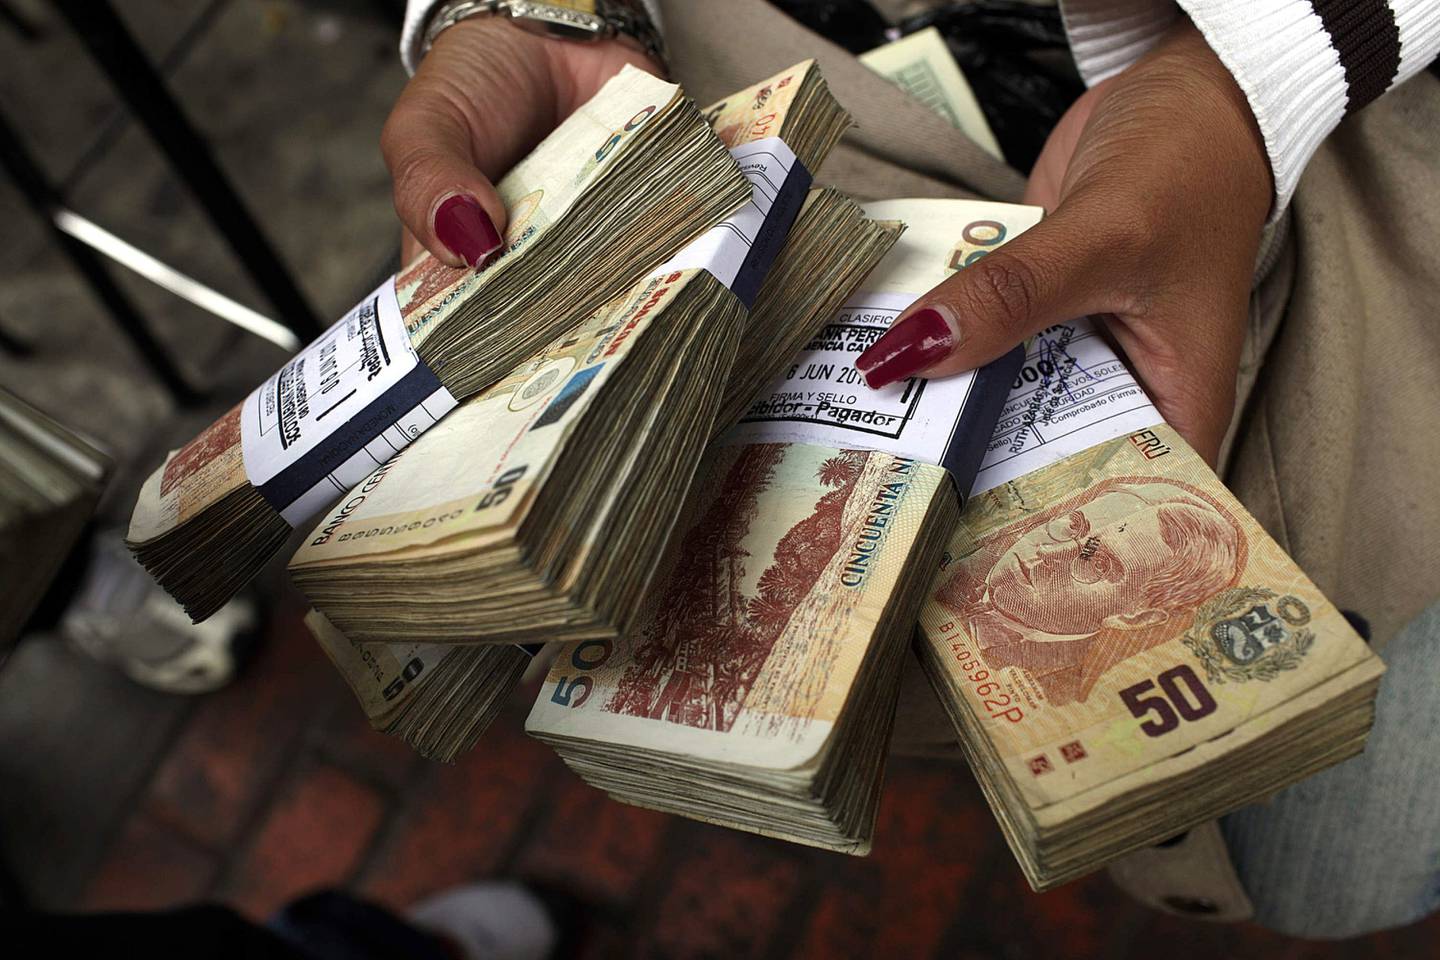 Peruvian bills are displayed as currency is traded on the street in Lima, Peru, on Tuesday, June 7, 2011.